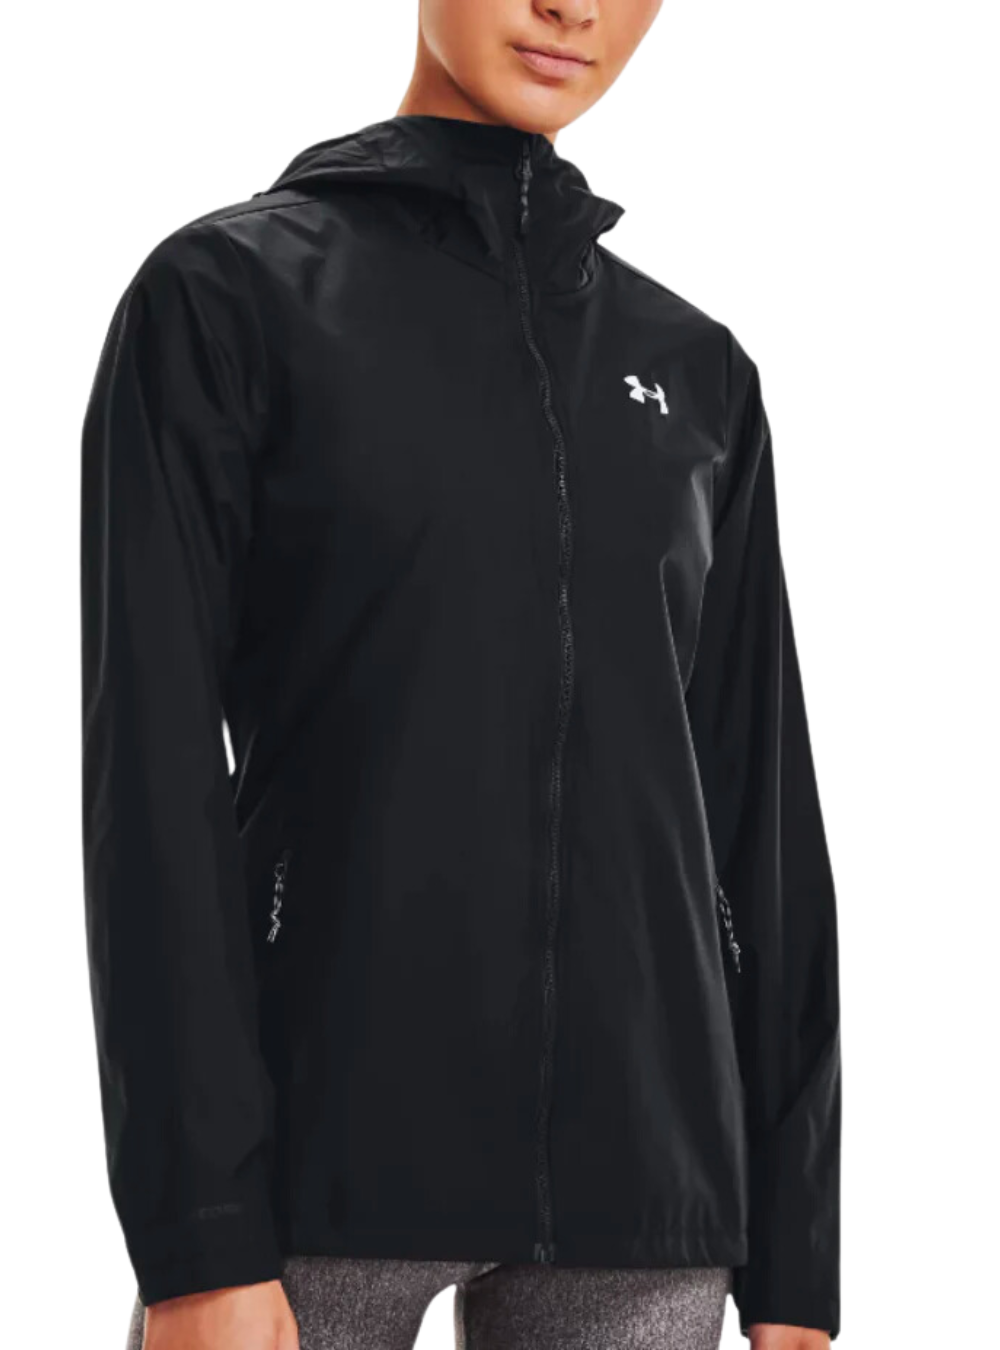 Under Armour Women's Forefront Rain Jacket